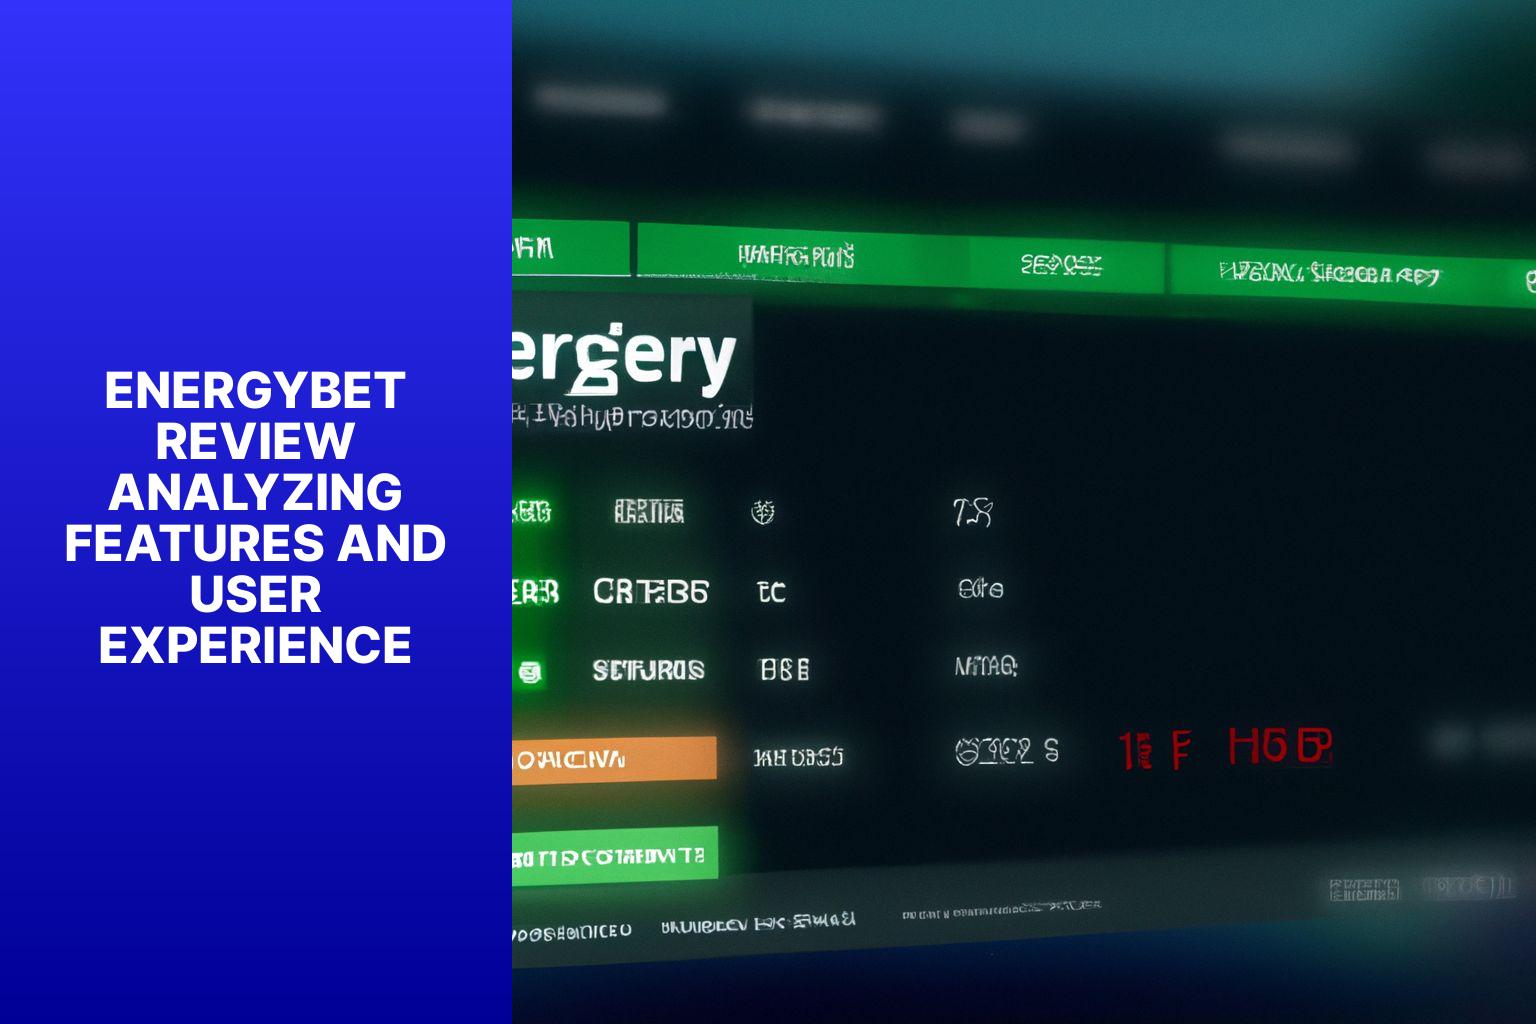 EnergyBet Review Analyzing Features and User Experience